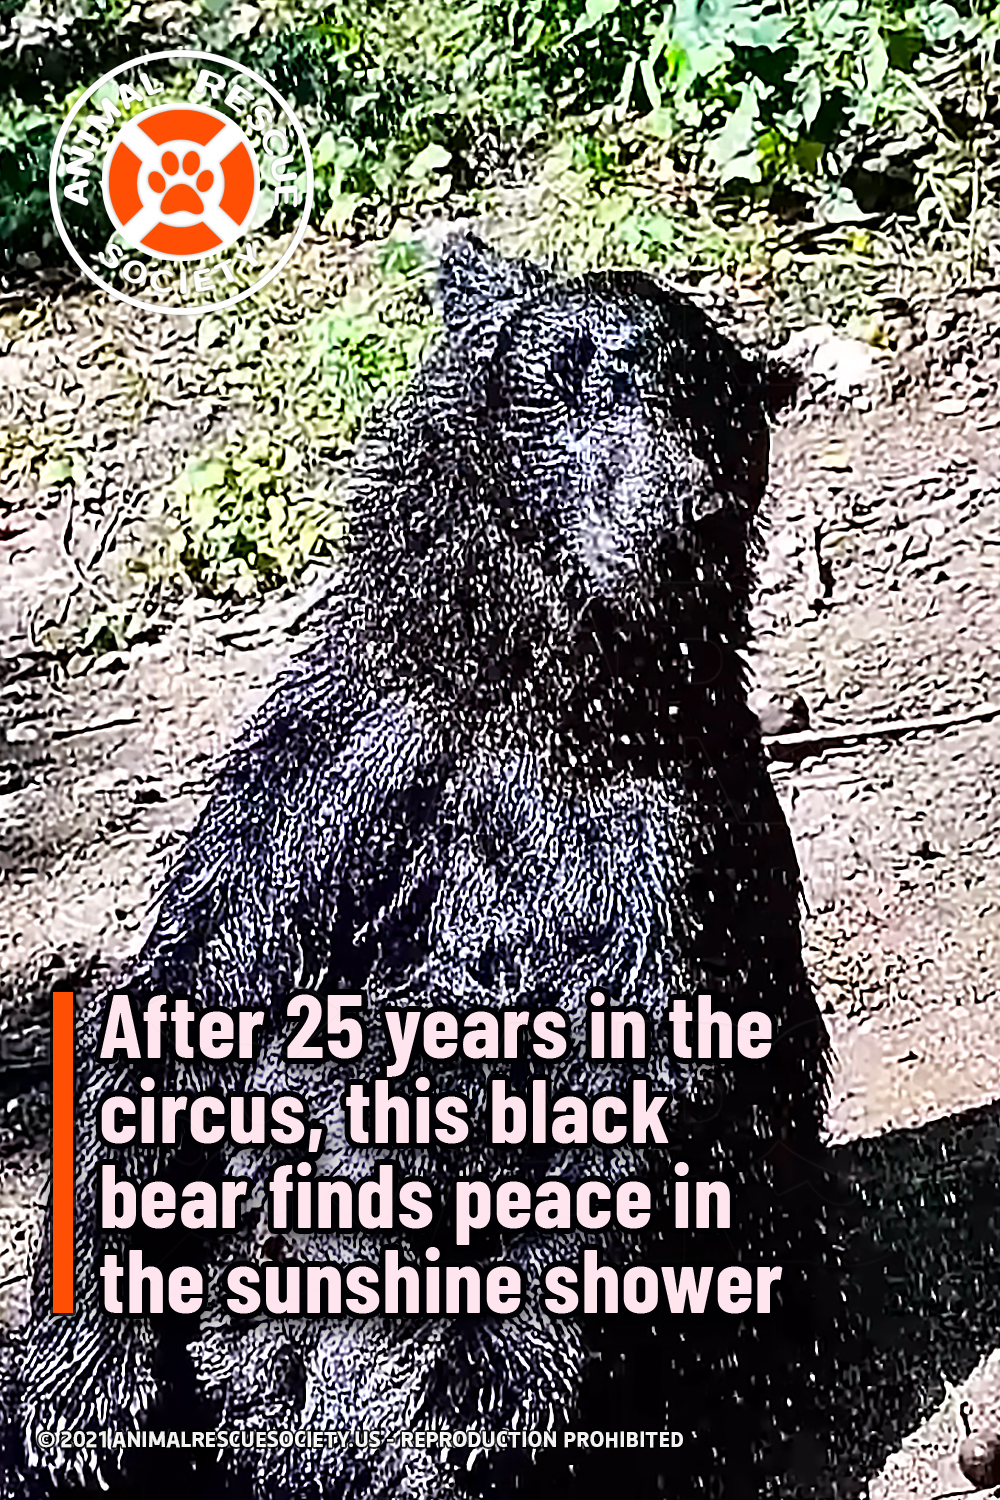 After 25 years in the circus, this black bear finds peace in the sunshine shower